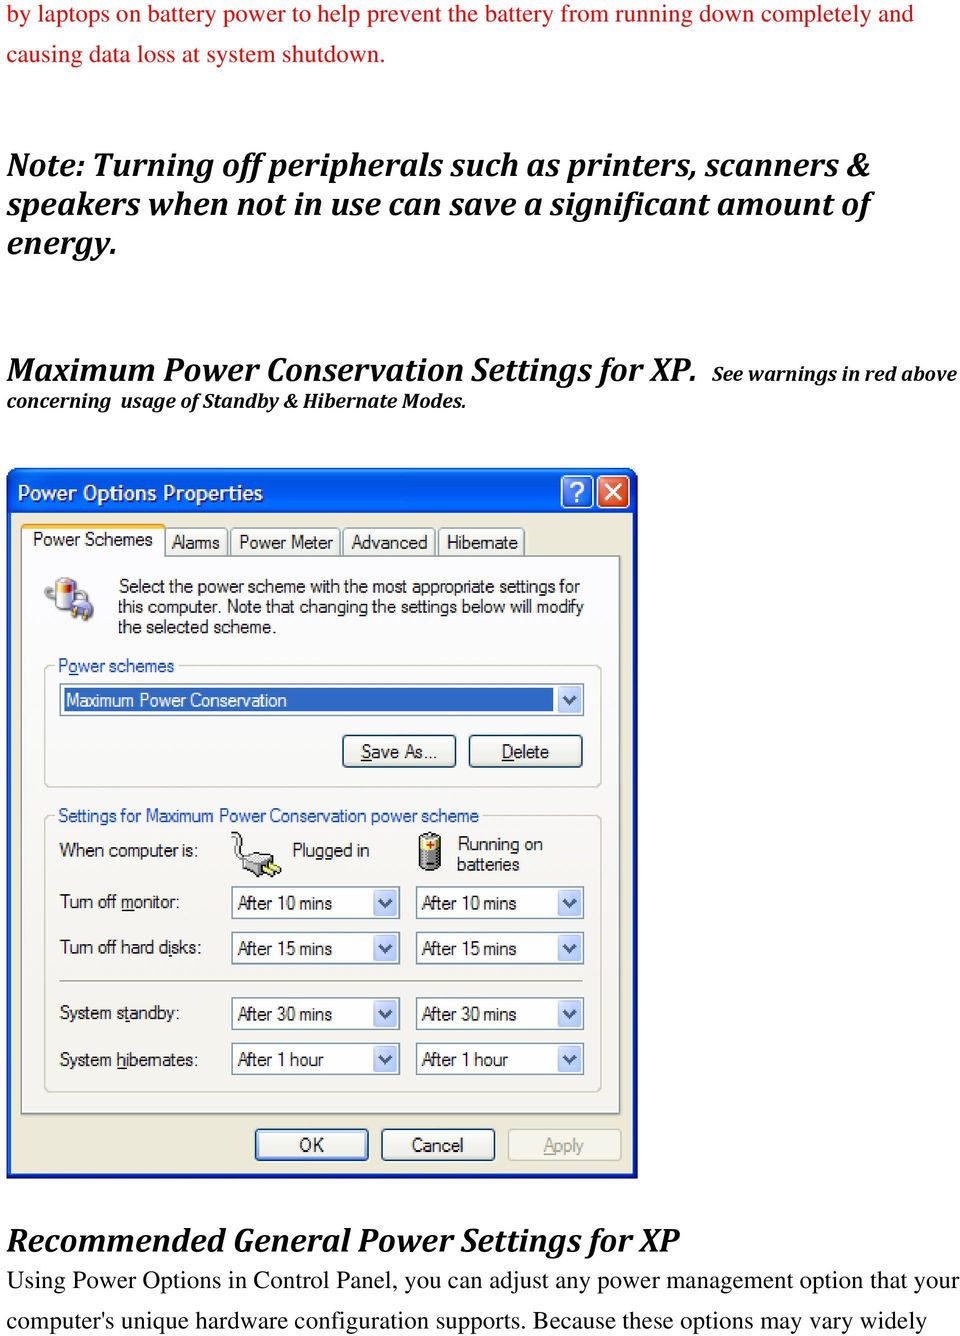 Maximum Power Conservation Settings for XP. See warnings in red above concerning usage of Standby & Hibernate Modes.